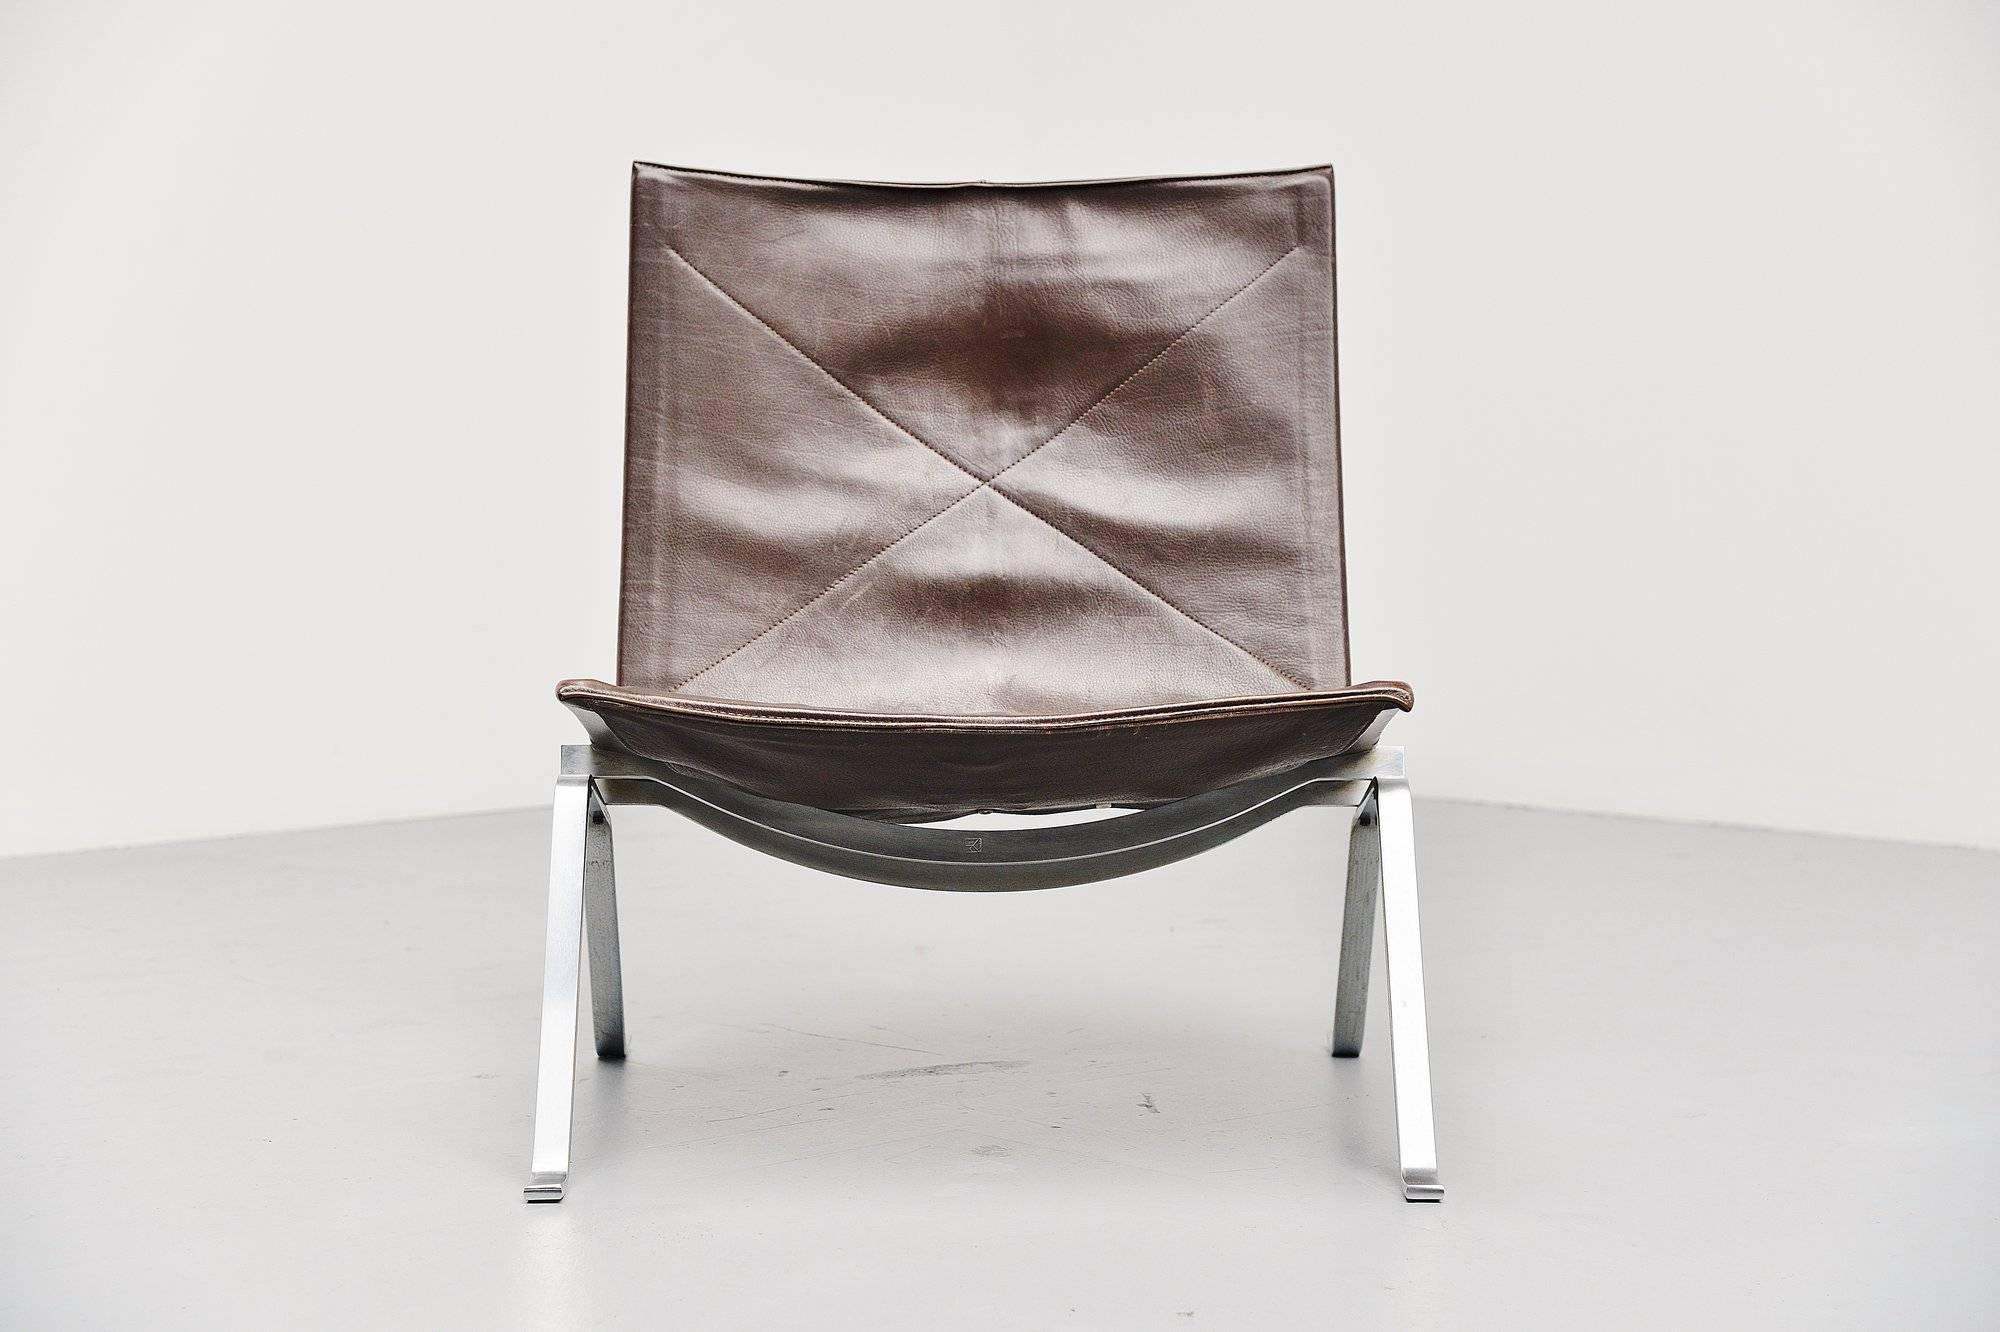 This is for a very nice example of the famous PK22 chair designed by Poul Kjaerholm for E Kold Christensen, Denmark, 1956. This model is an early edition with very nice dark brown patinated leather. The chair consisted of a spring steel structure,